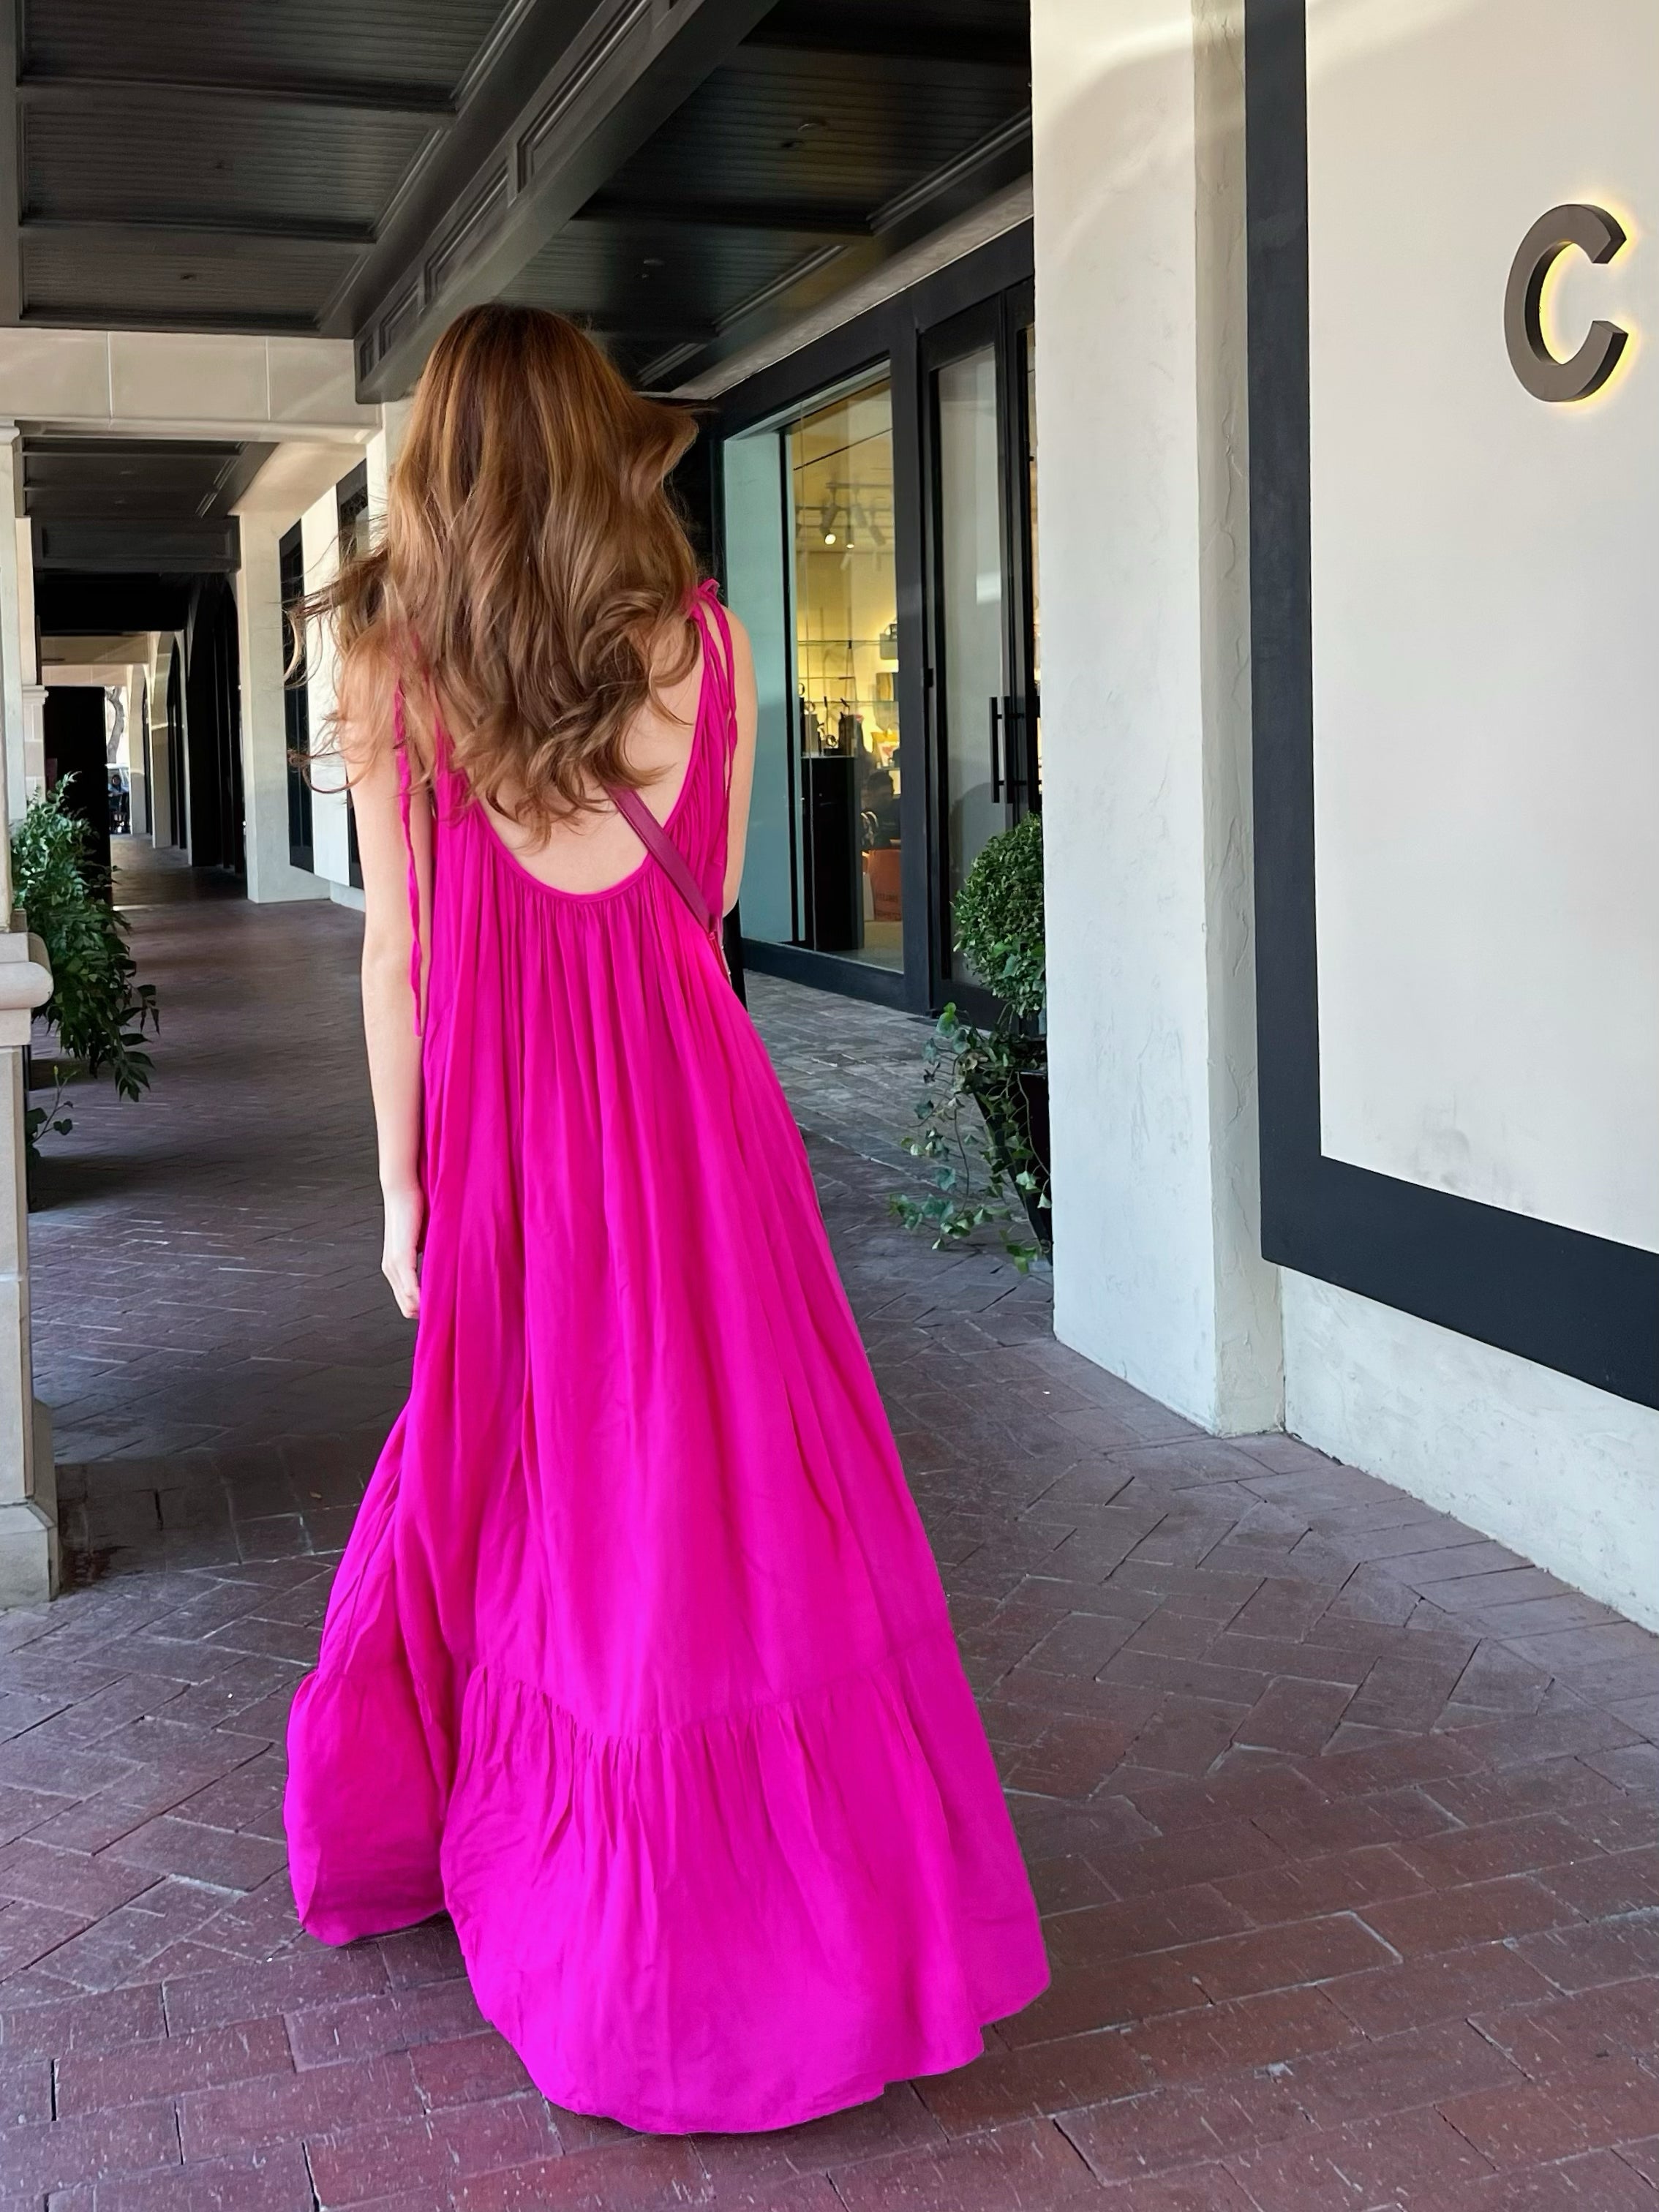 Unleash your inner fashionista with our Hot Pink Backless Maxi Dress from Mali - Shop now and stun the crowd!